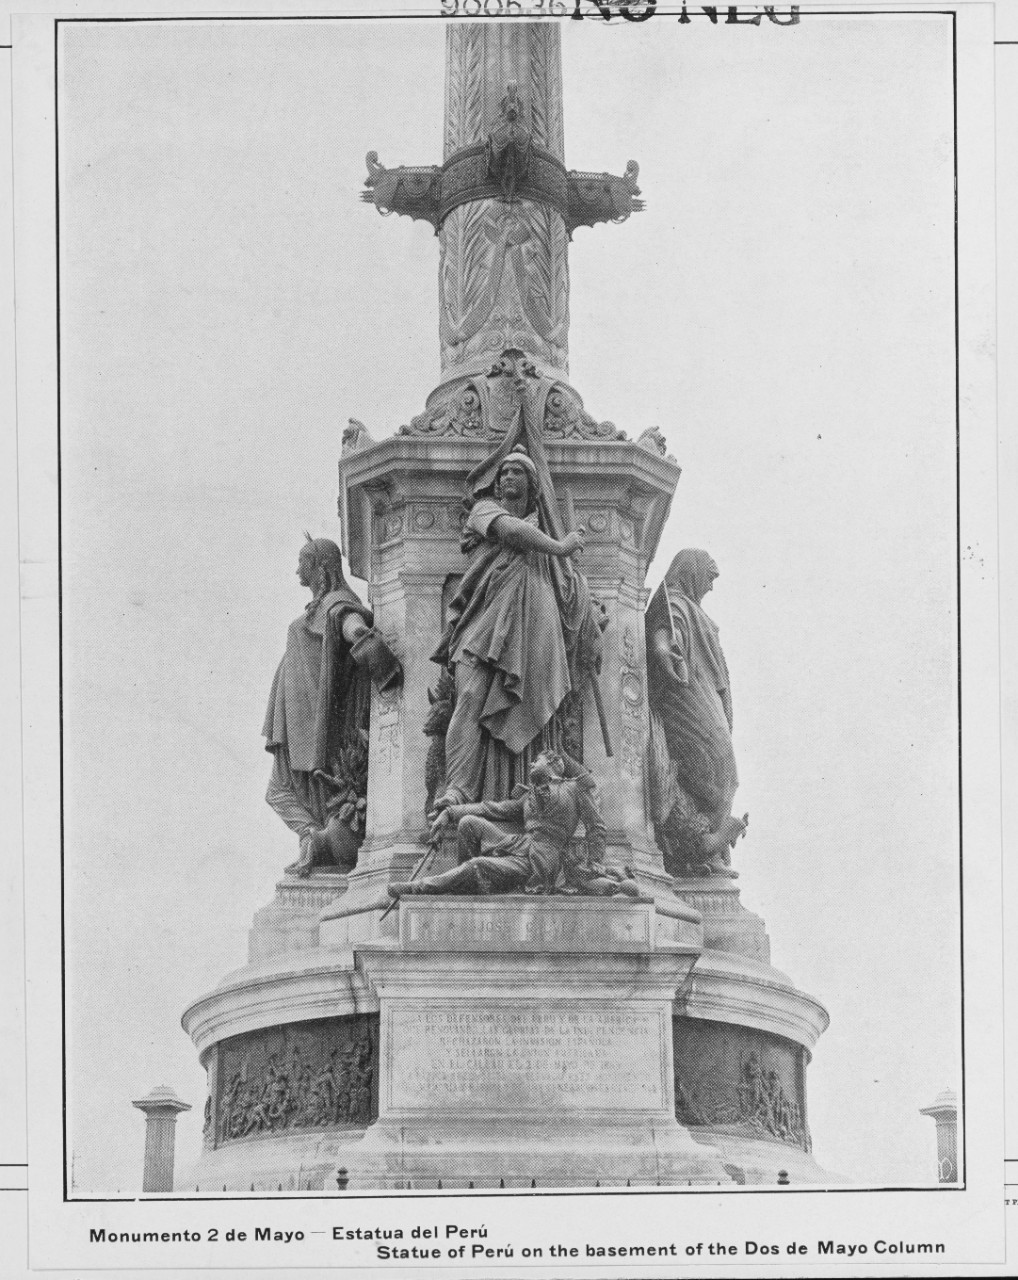 Second of May Monument